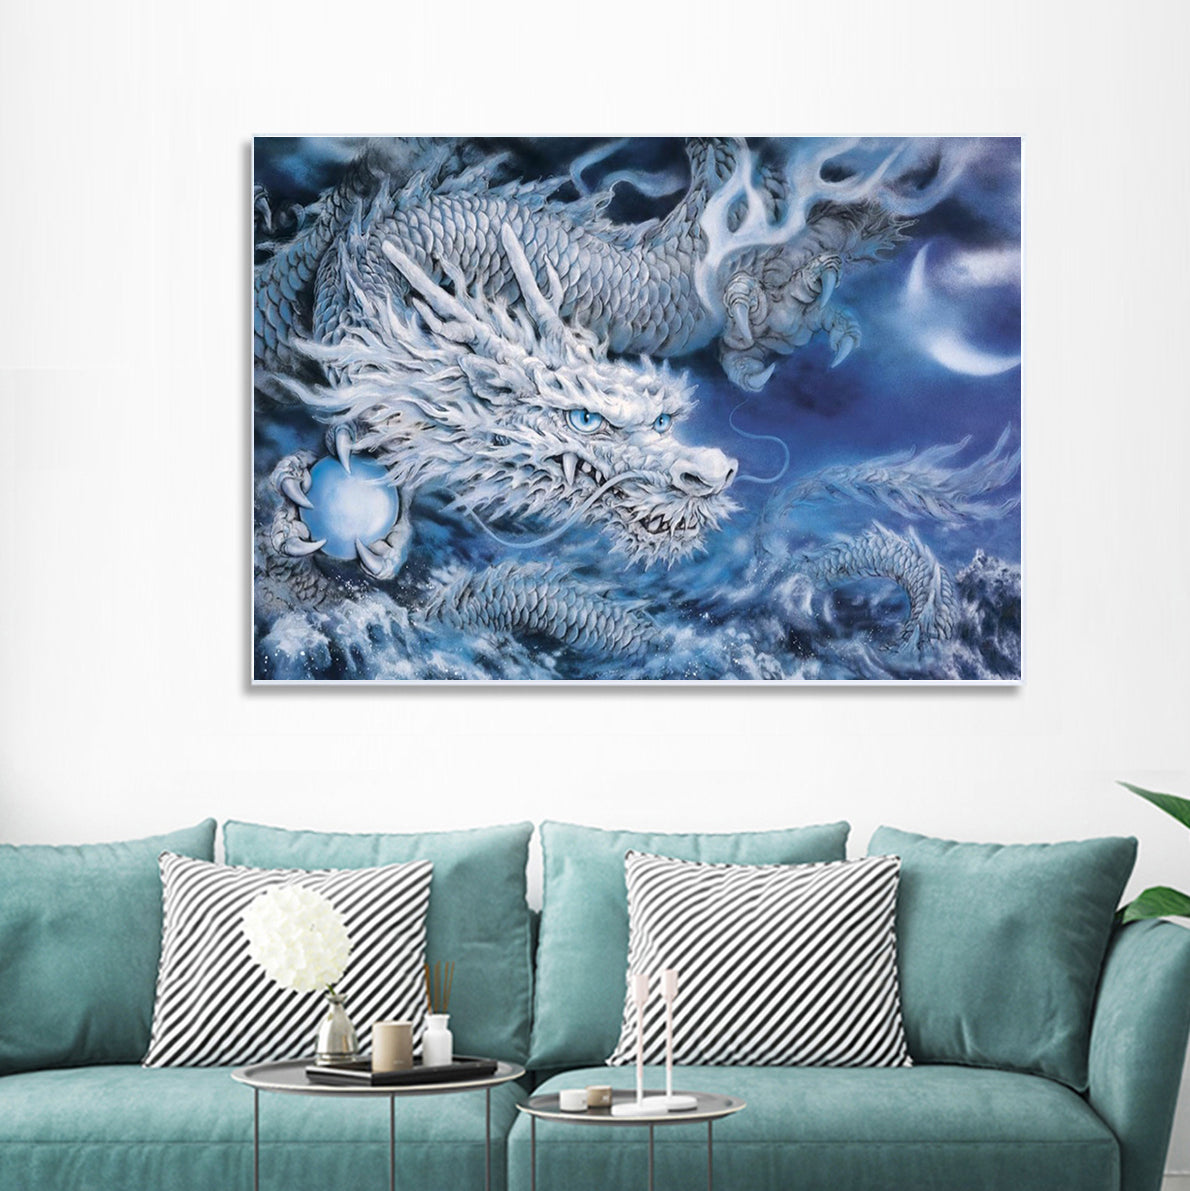 DIY Painting By Numbers - Ice Dragon  (16"x20" / 40x50cm)